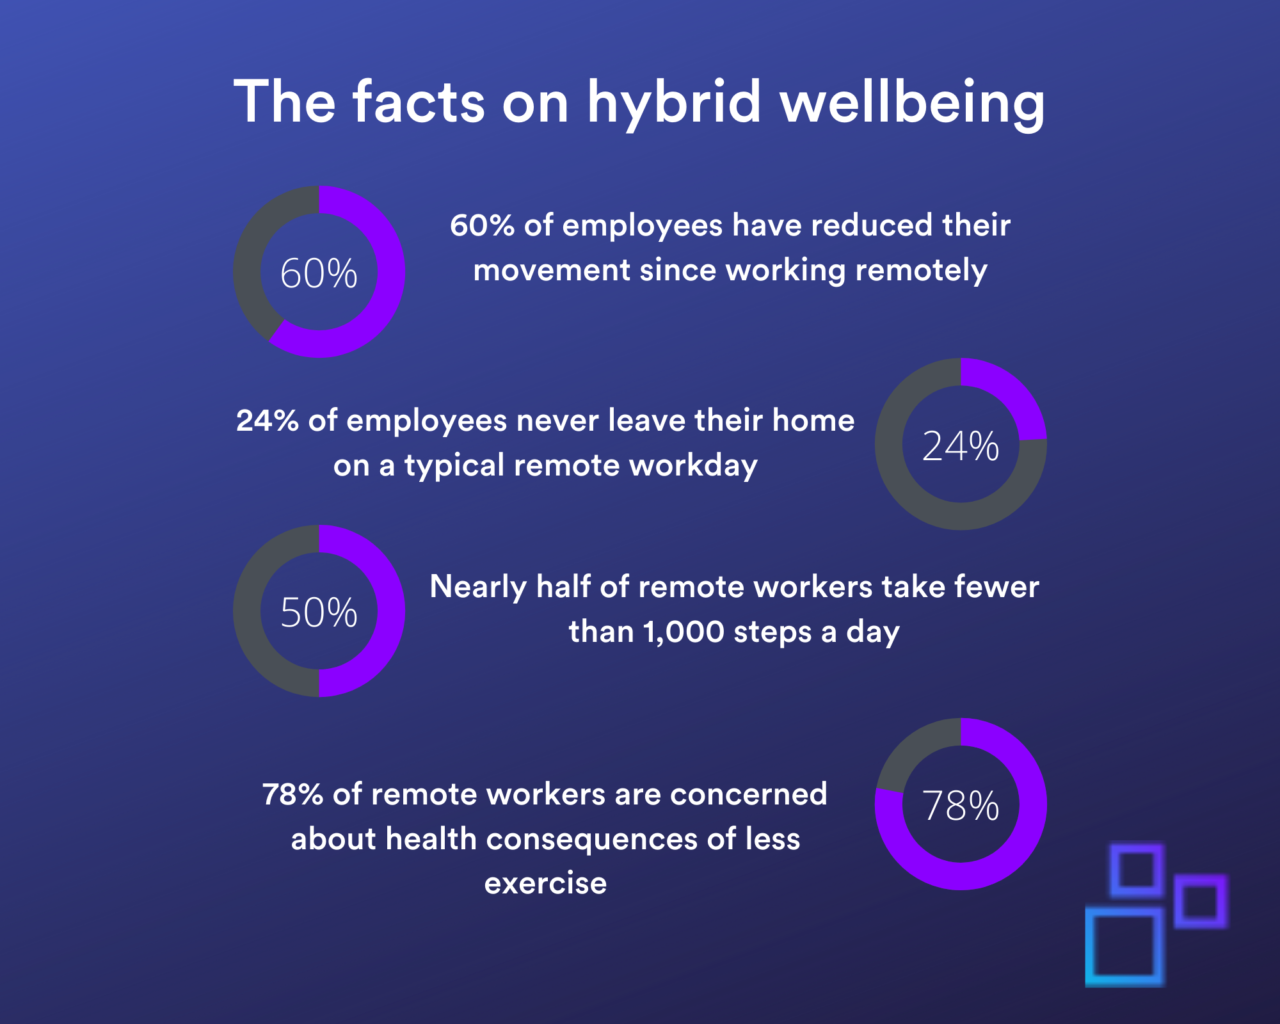 Chart containing facts about physical wellbeing for hybrid workers